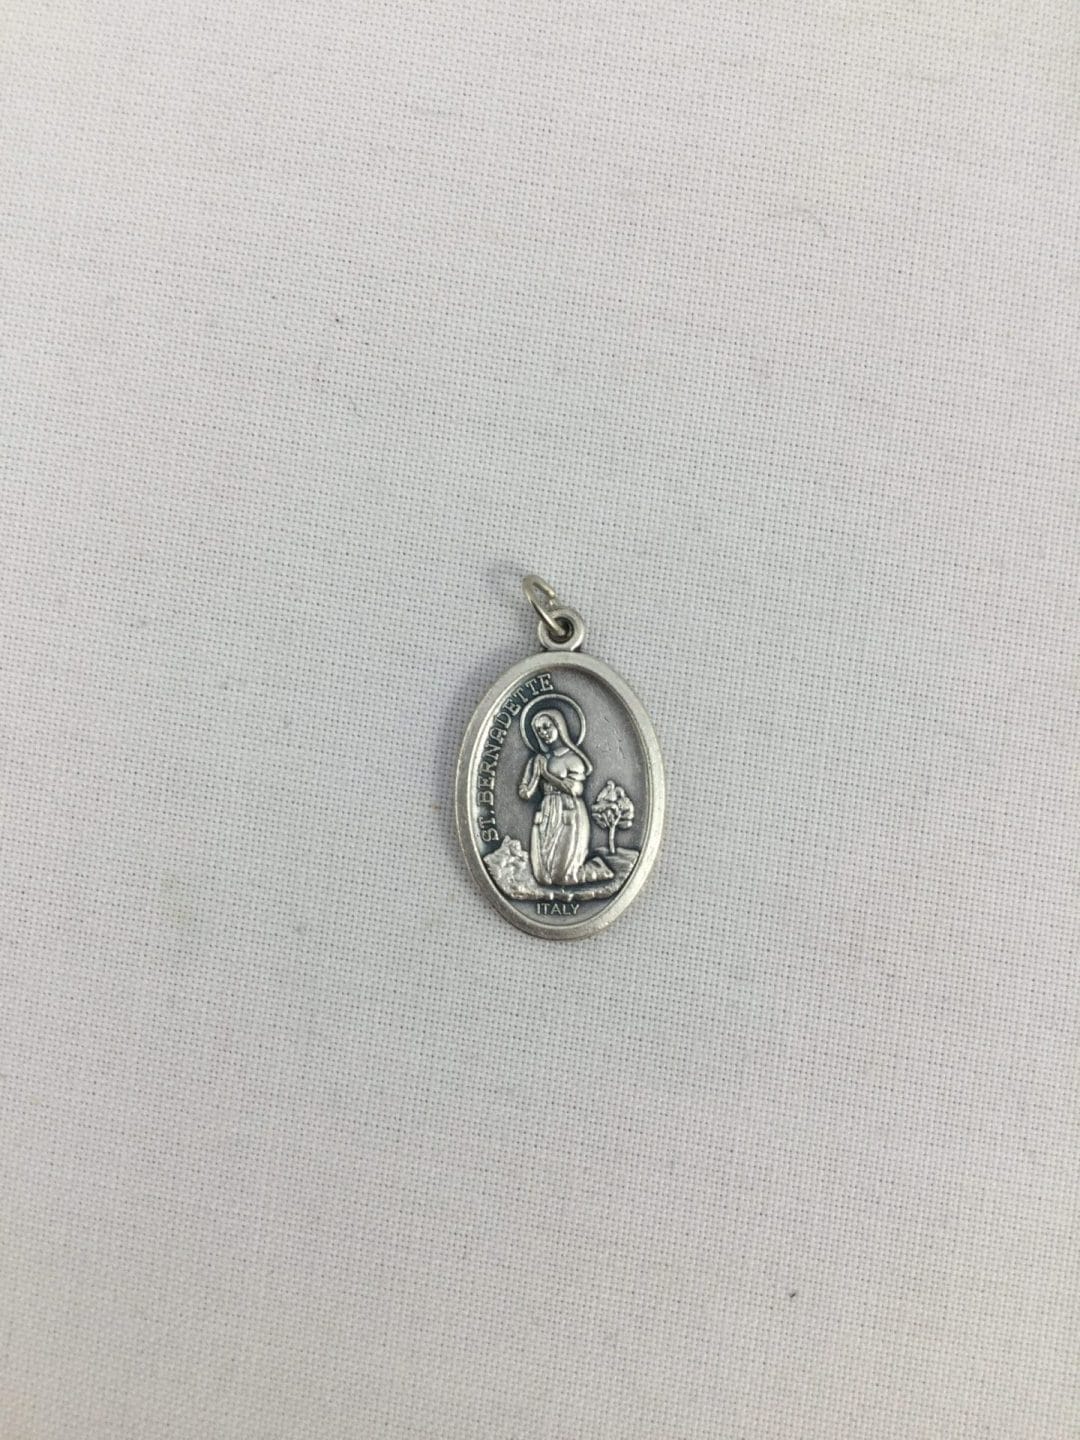 Our lady Of Lourdes (and Bernadette) Medal | Church Stores